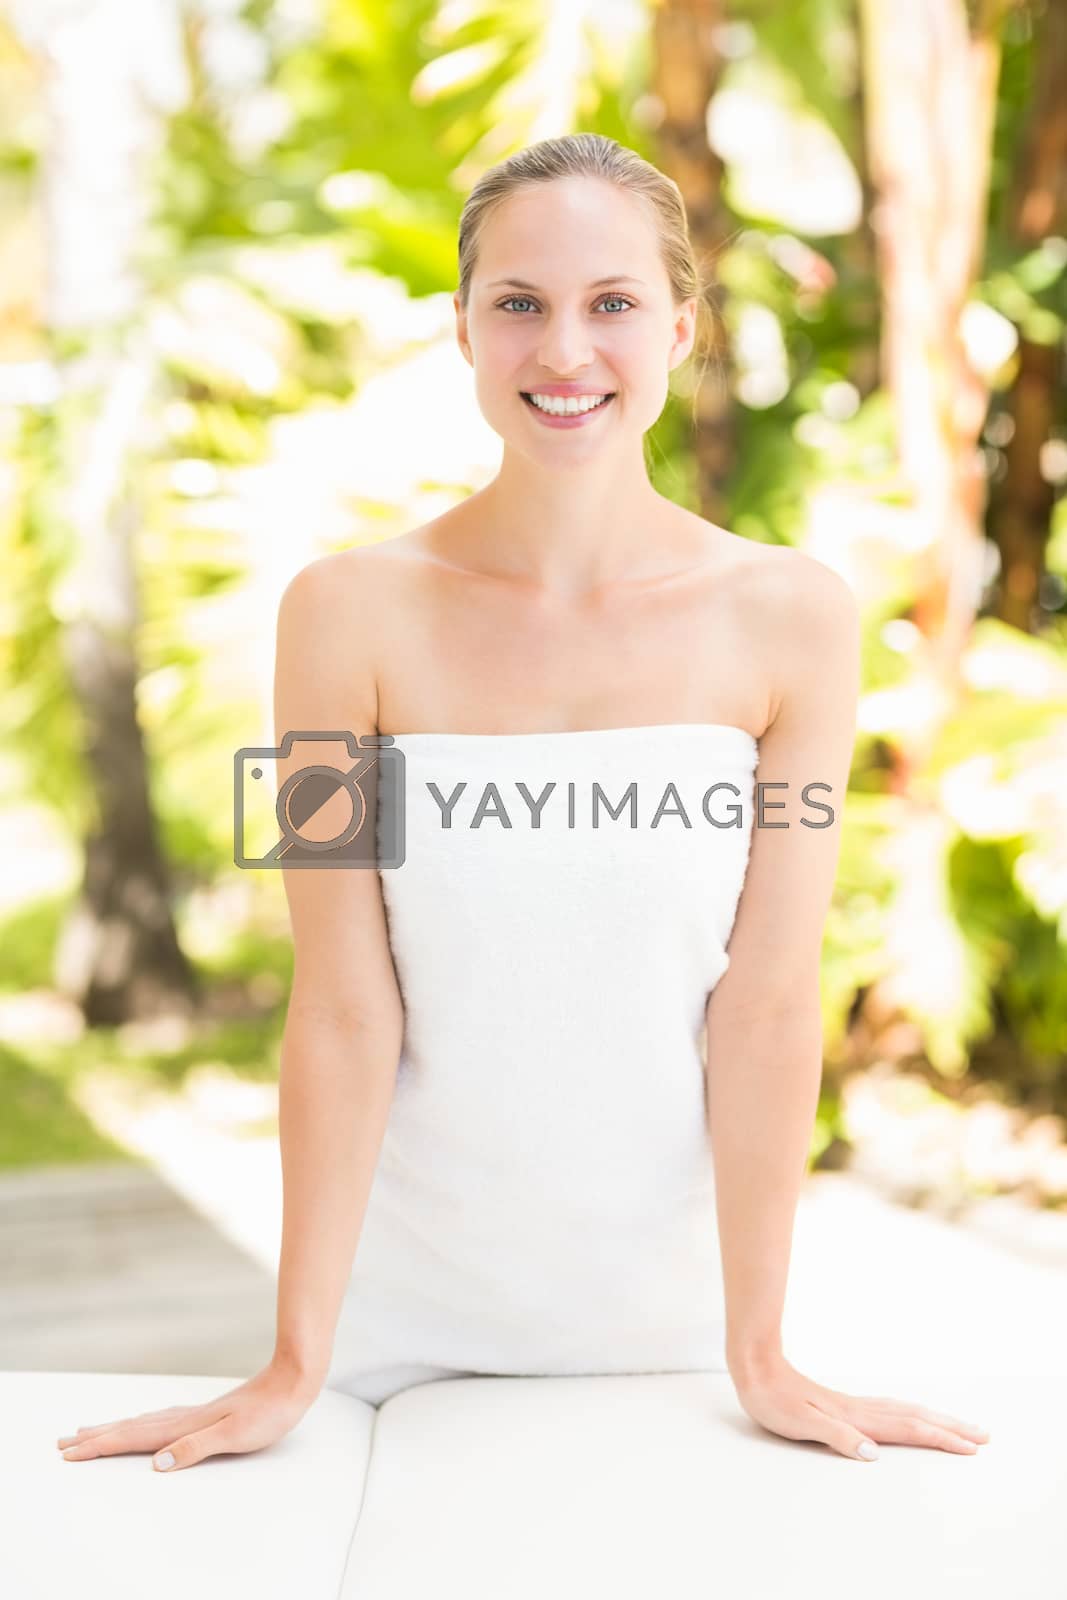 Royalty free image of Beautiful young woman  by Wavebreakmedia